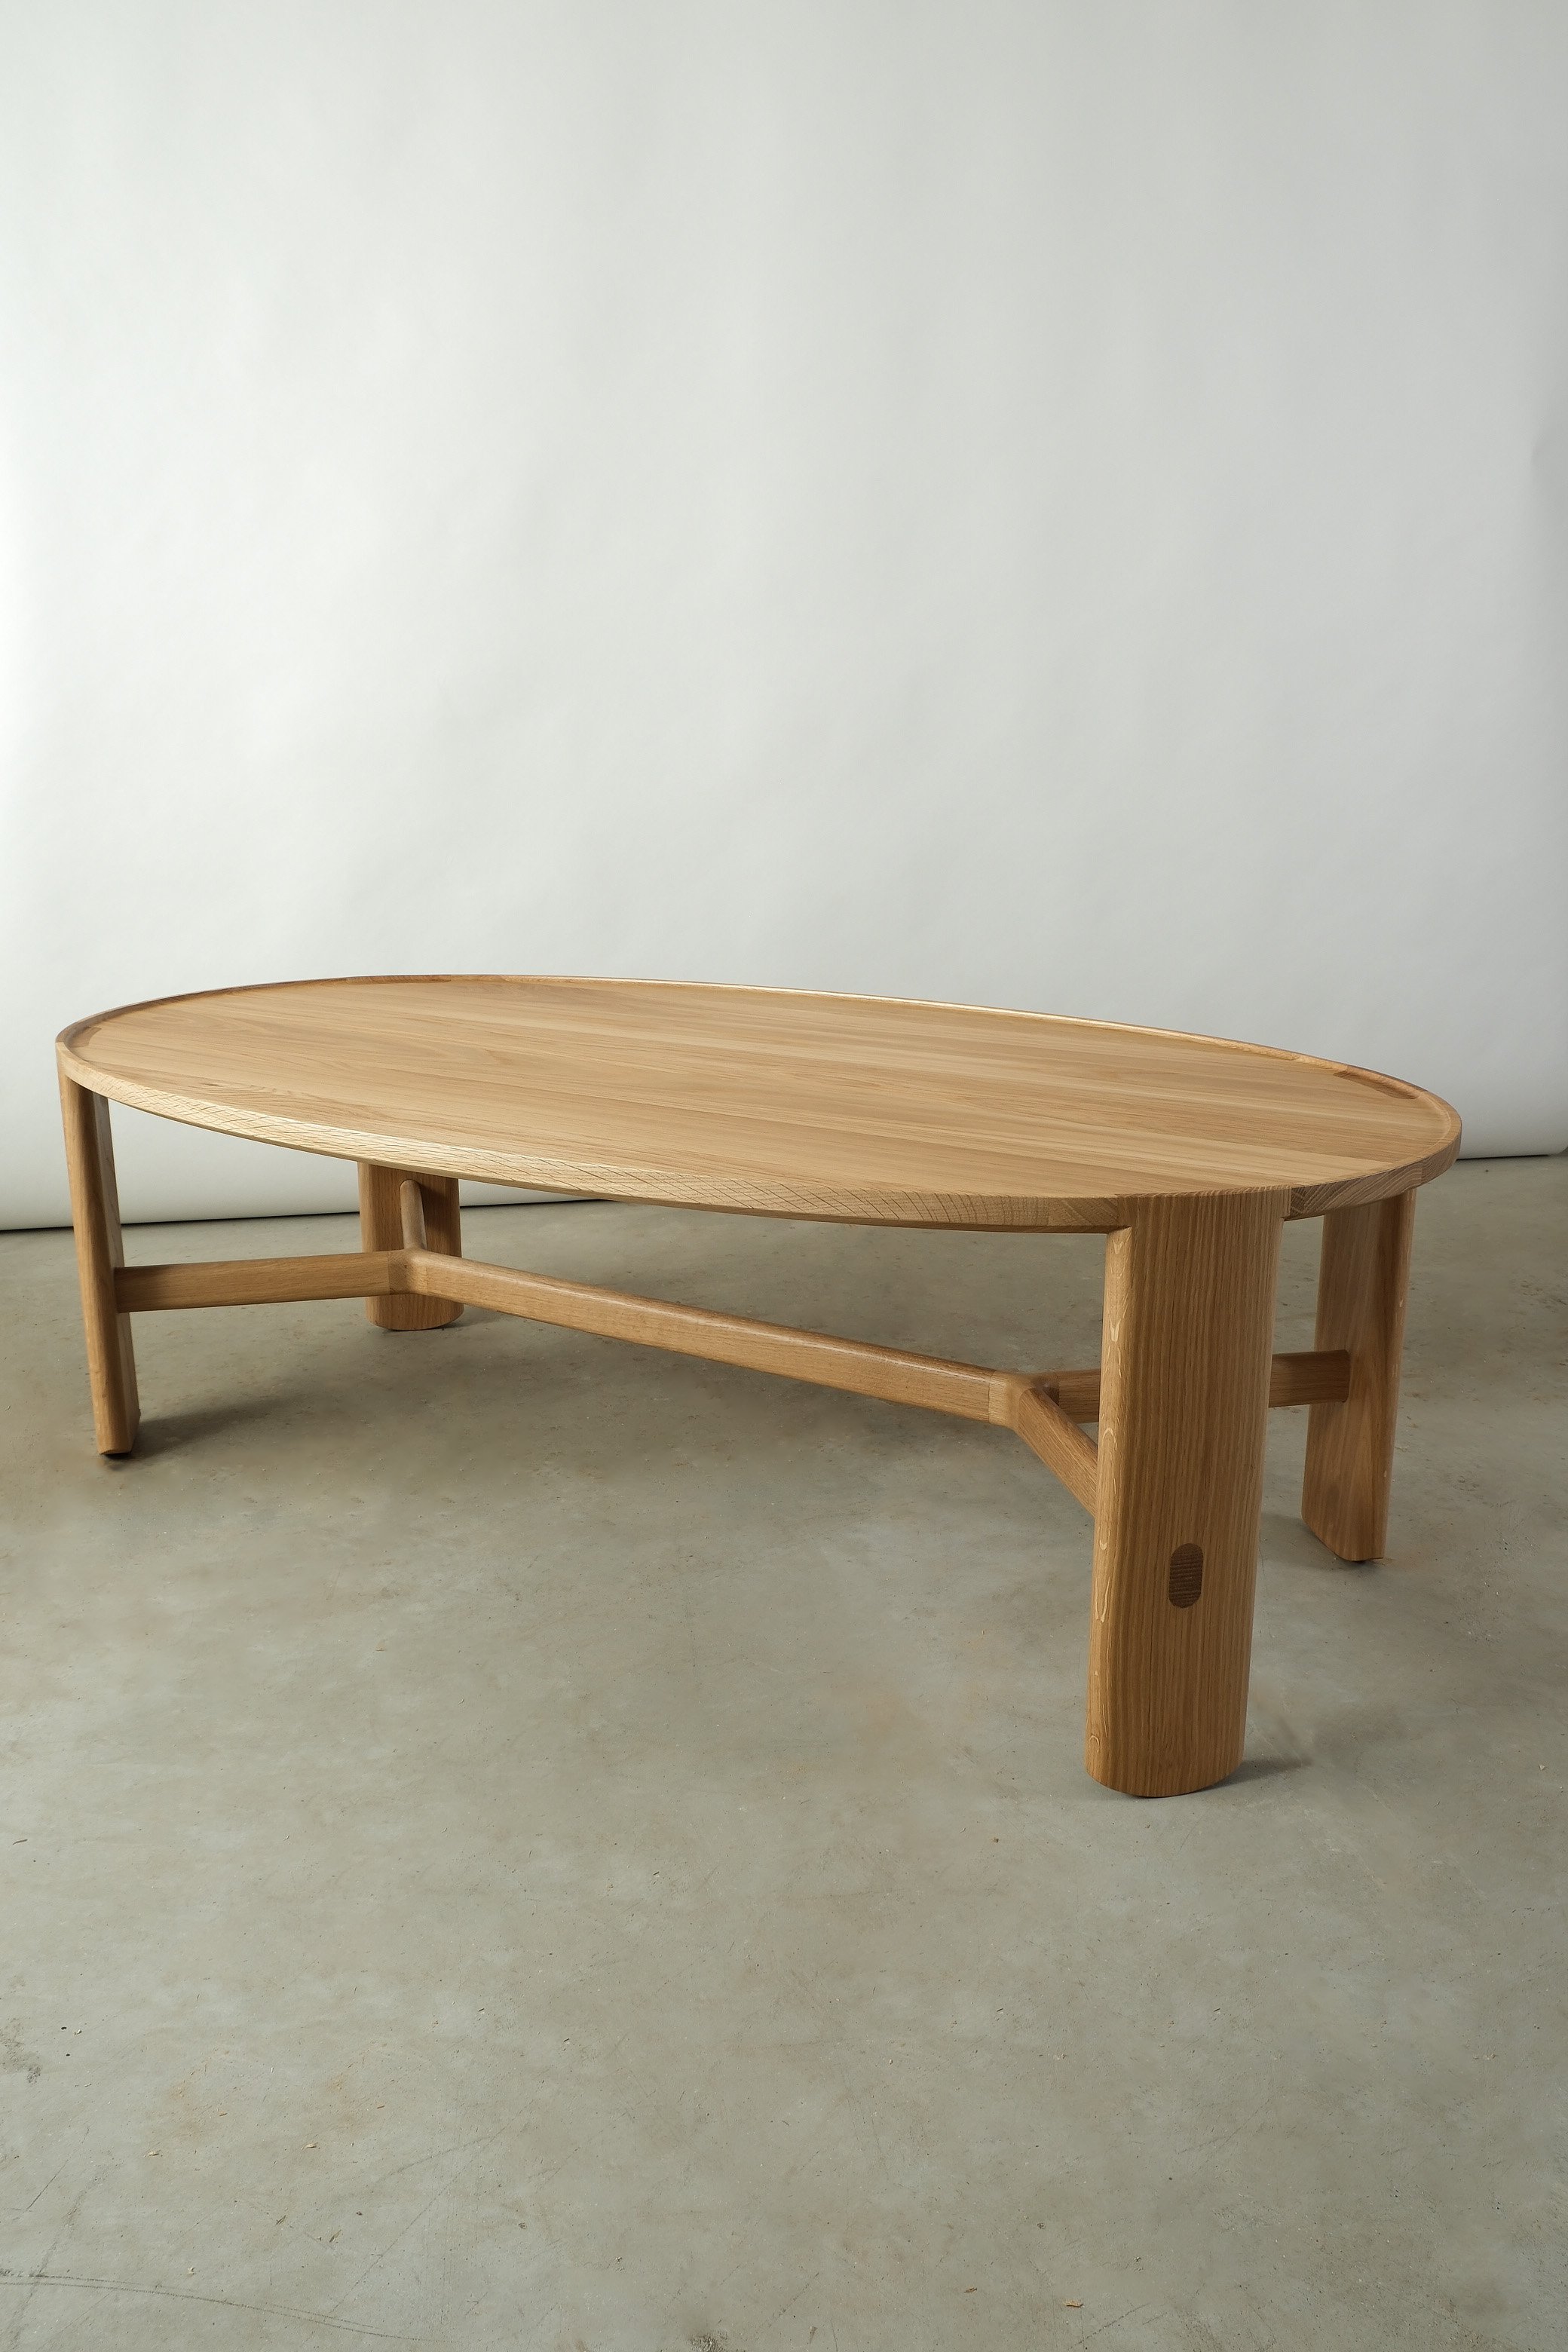 ghent low table 3:4 angle.JPG